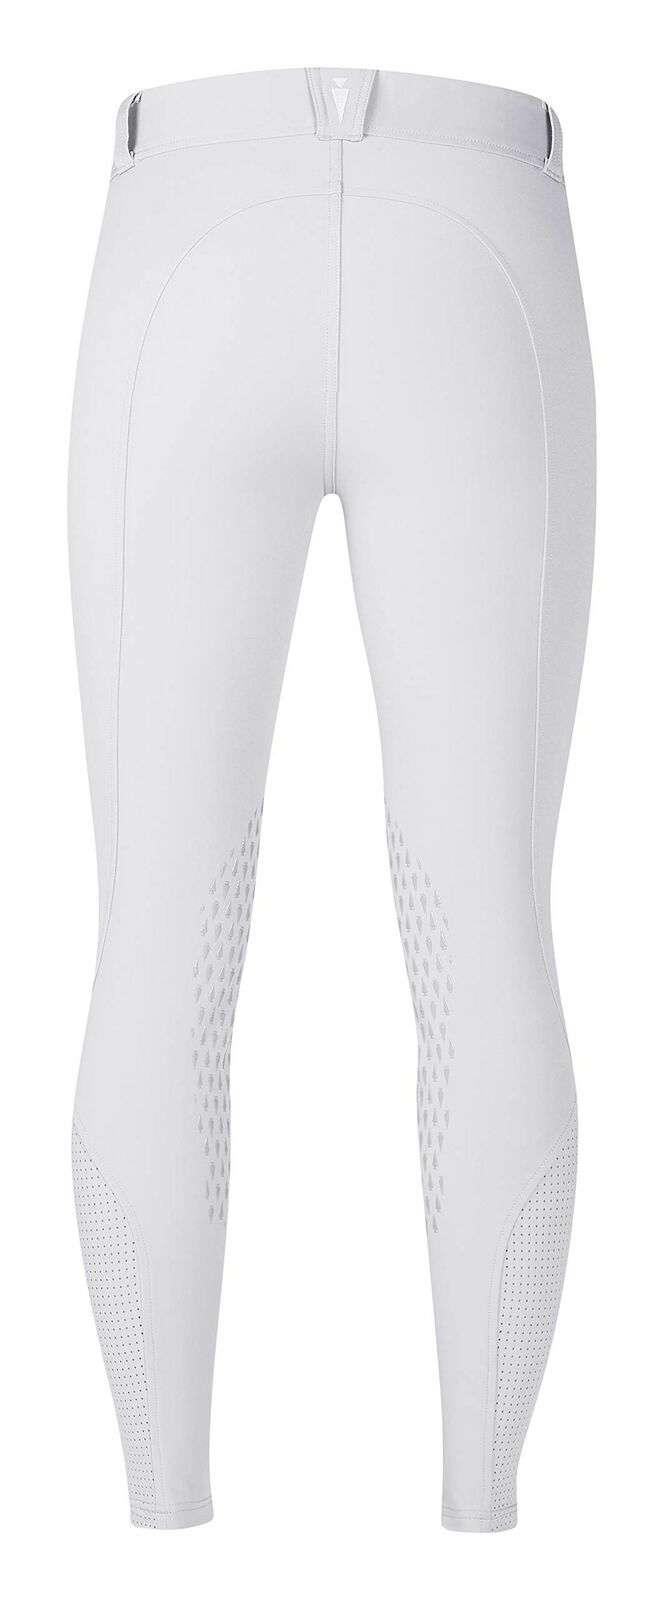 White Kerrits Affinity Women's IceFil Knee Patch Breeches